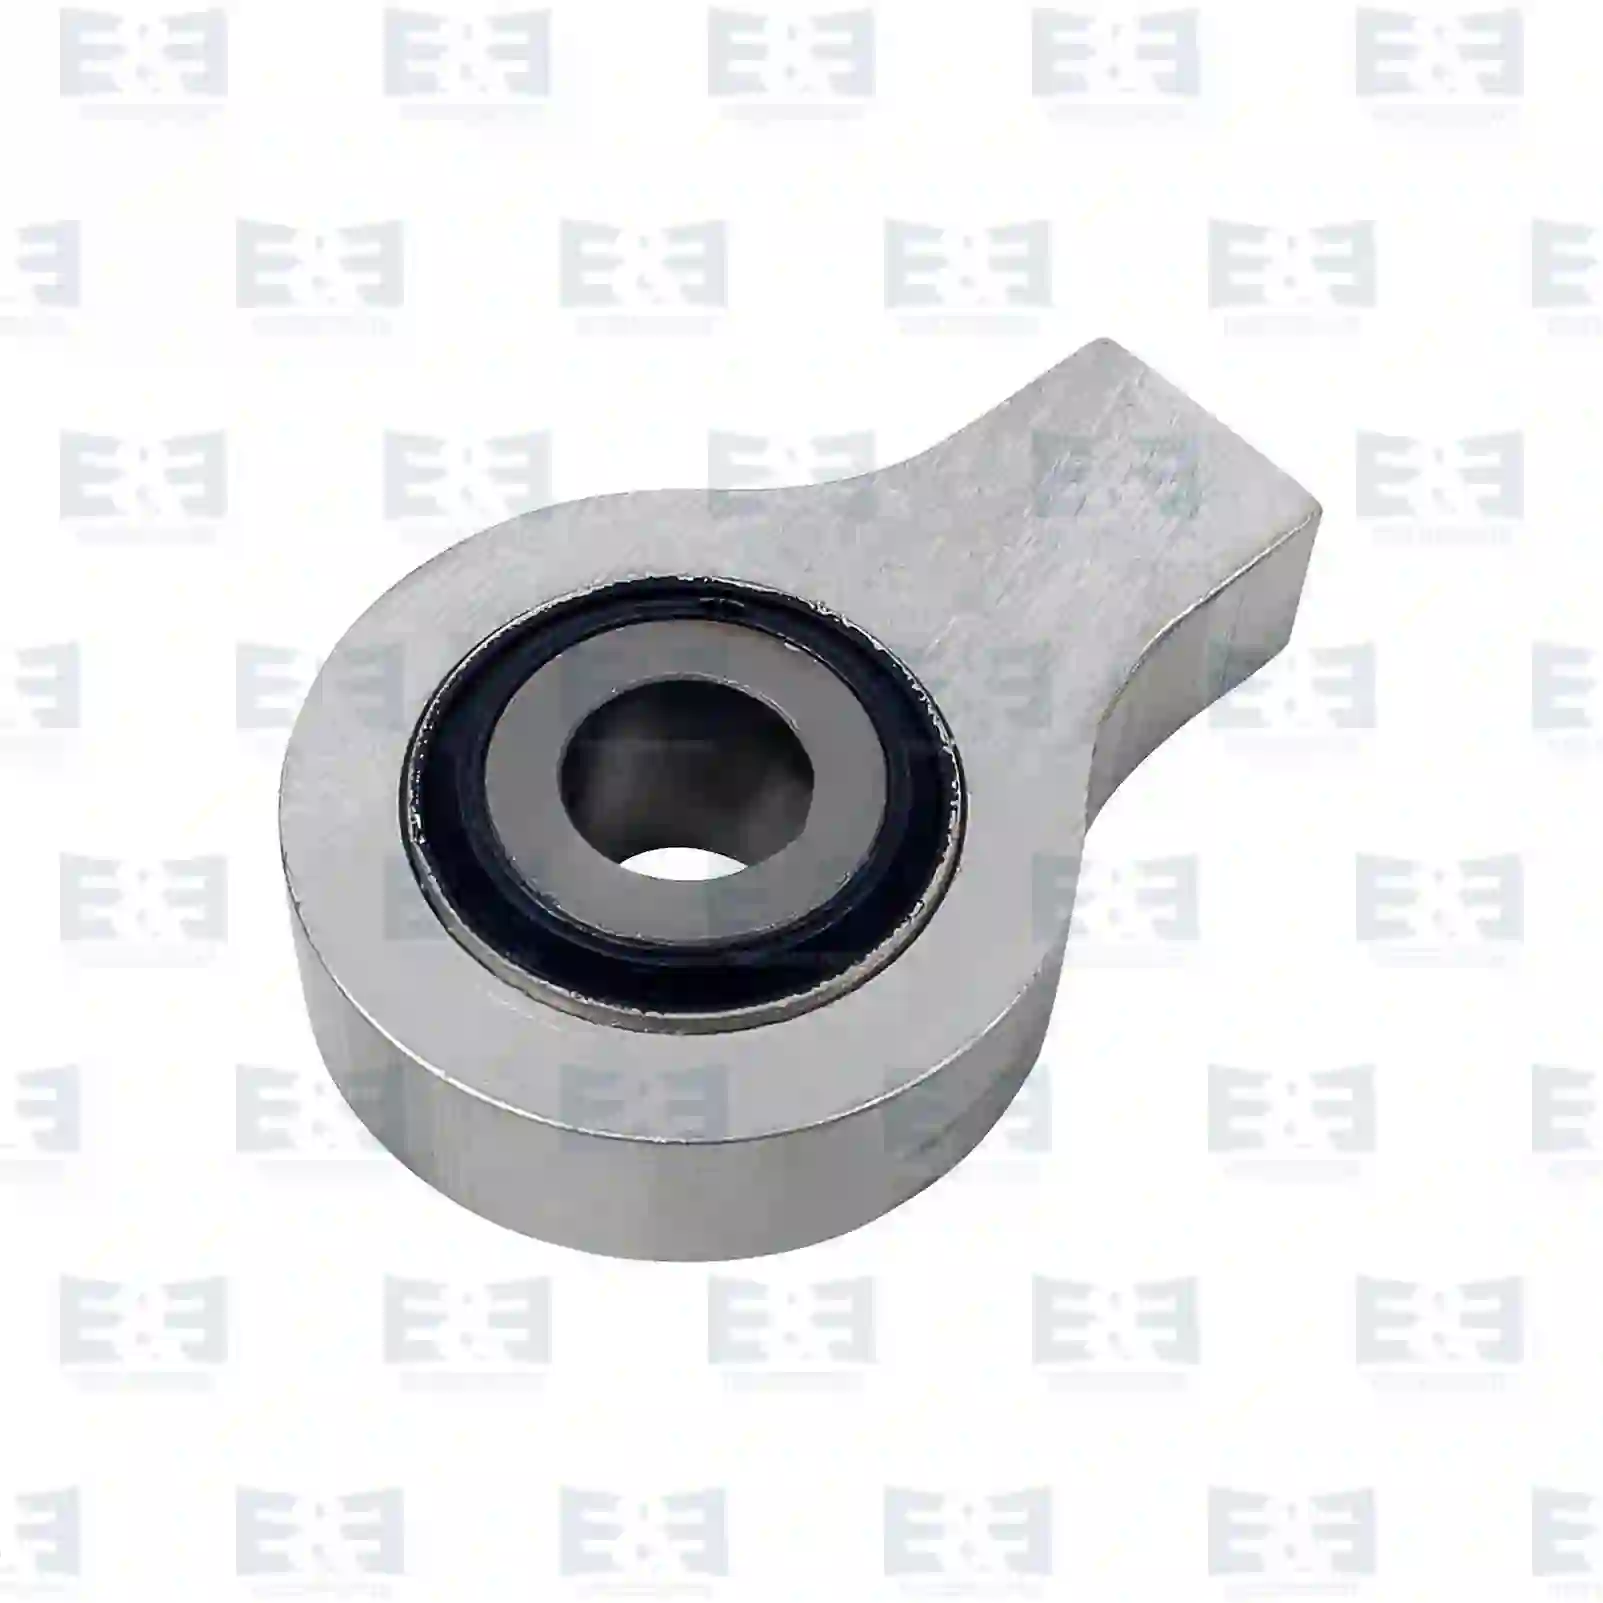  Bearing joint || E&E Truck Spare Parts | Truck Spare Parts, Auotomotive Spare Parts